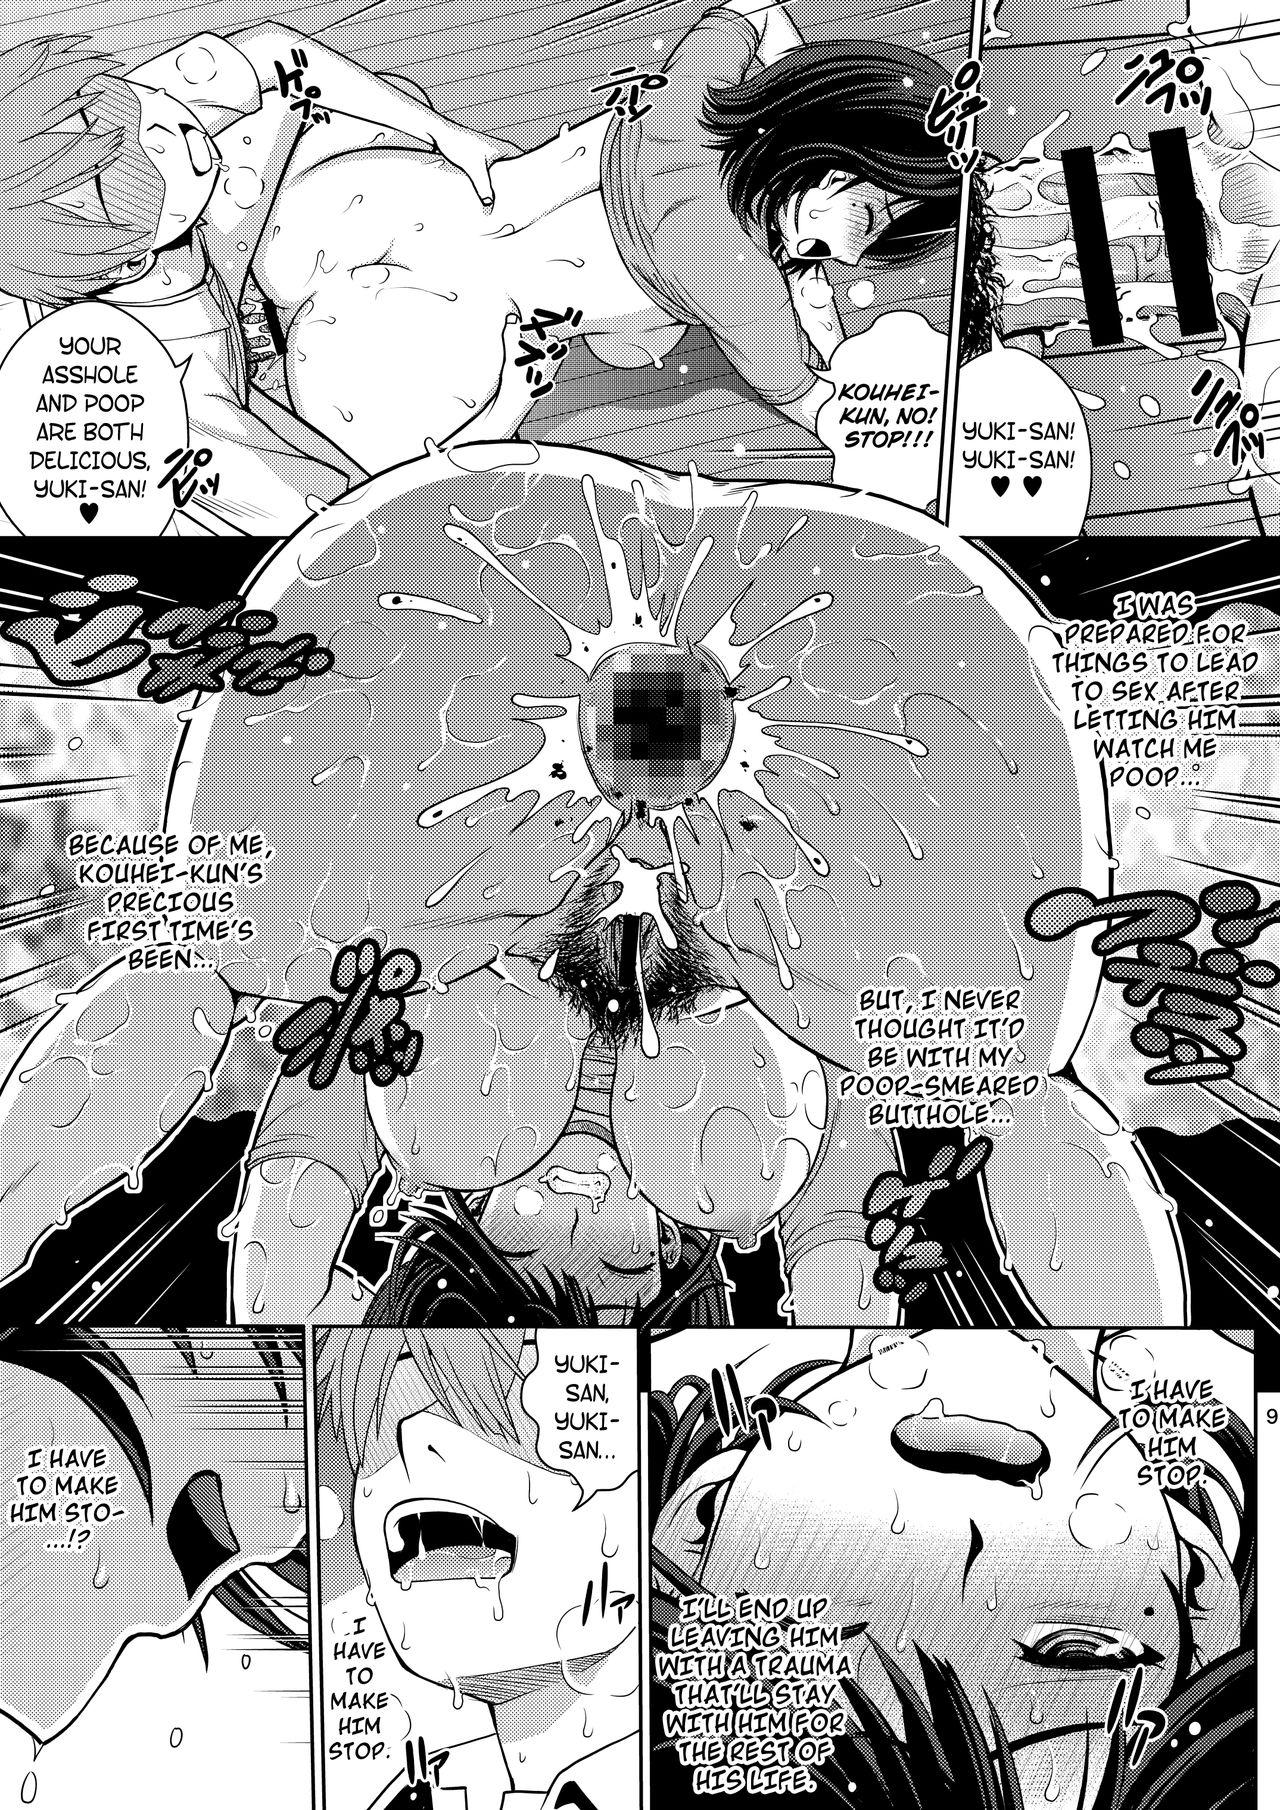 Argentino Chuutte Shite 2 | Give Me An Enema 2 - Original Inked - Page 9